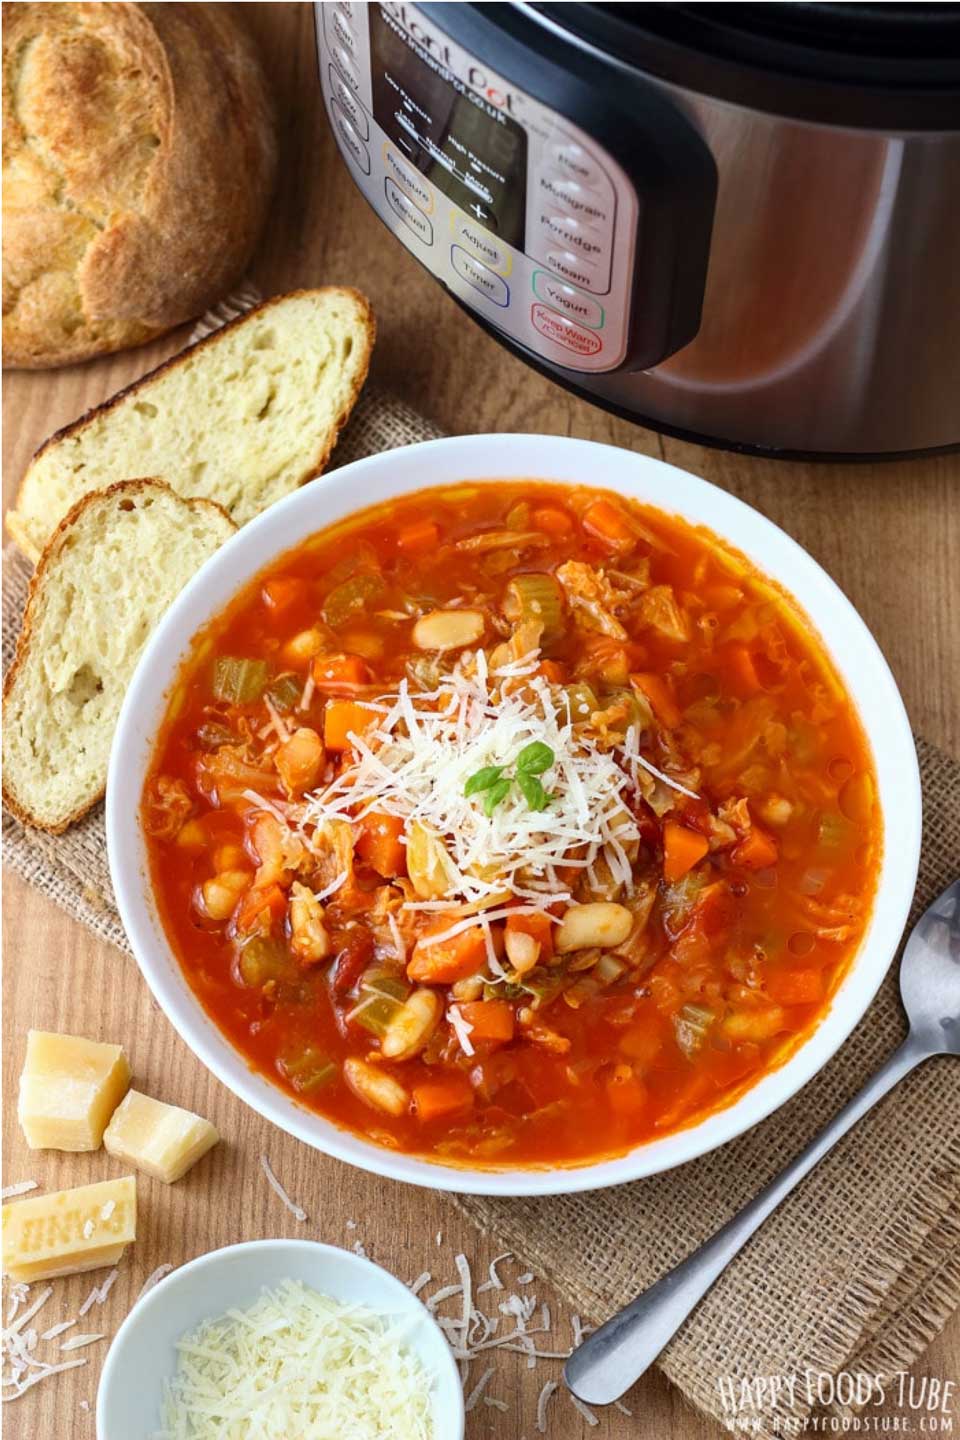 Instant Pot Minestrone Soup from Julia at Happy Foods Tube can be made vegetarian or vegan. Just one of the scrumptious Instant Pot soups in our line-up of must-try, meat free pressure cooker soup recipes!